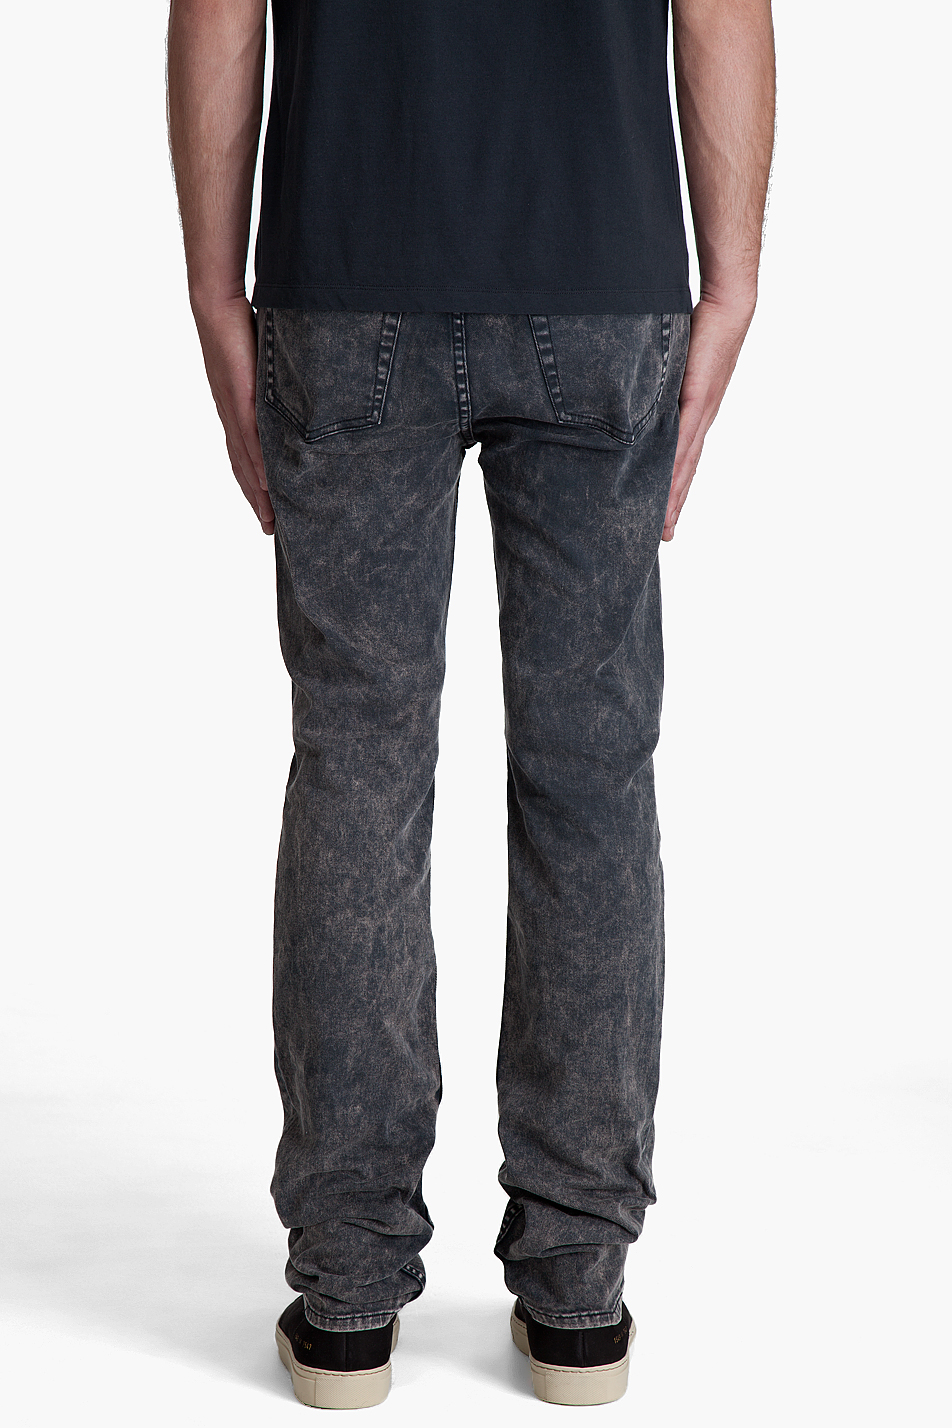 Marc by marc jacobs Stick Fit Denim Jeans in Blue for Men | Lyst